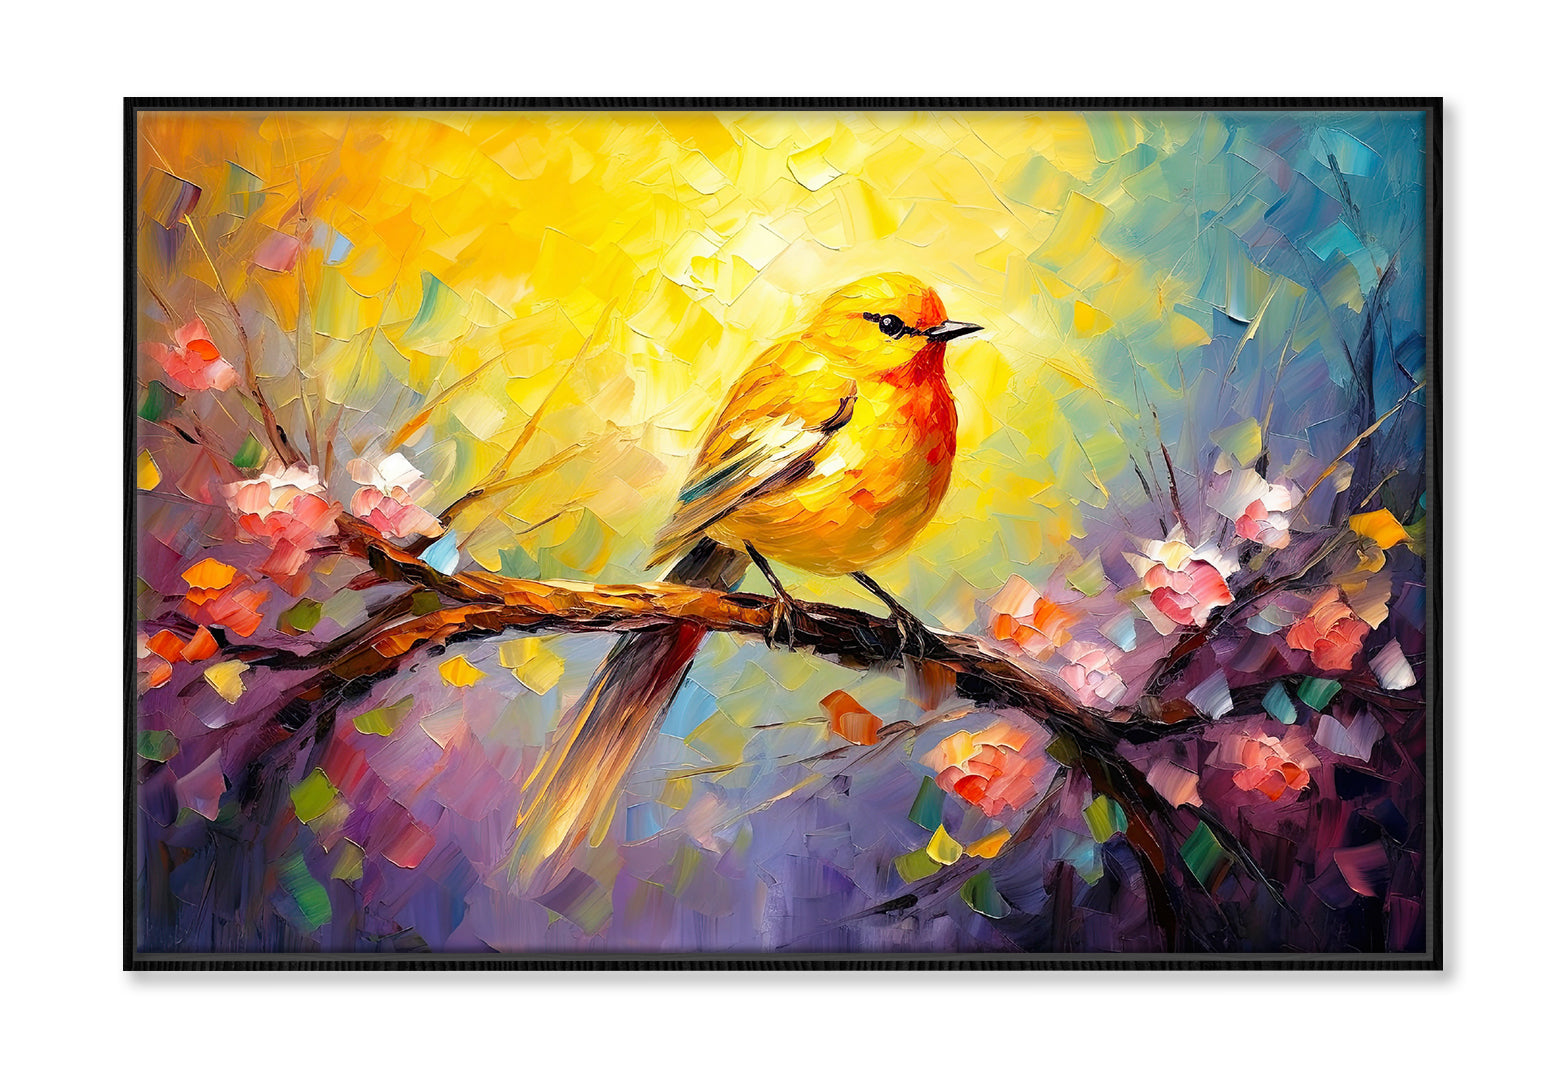 Yellow Bird on Spring Tree Branch Oil Painting Wall Art Limited Edition High Quality Print Canvas Box Framed Black